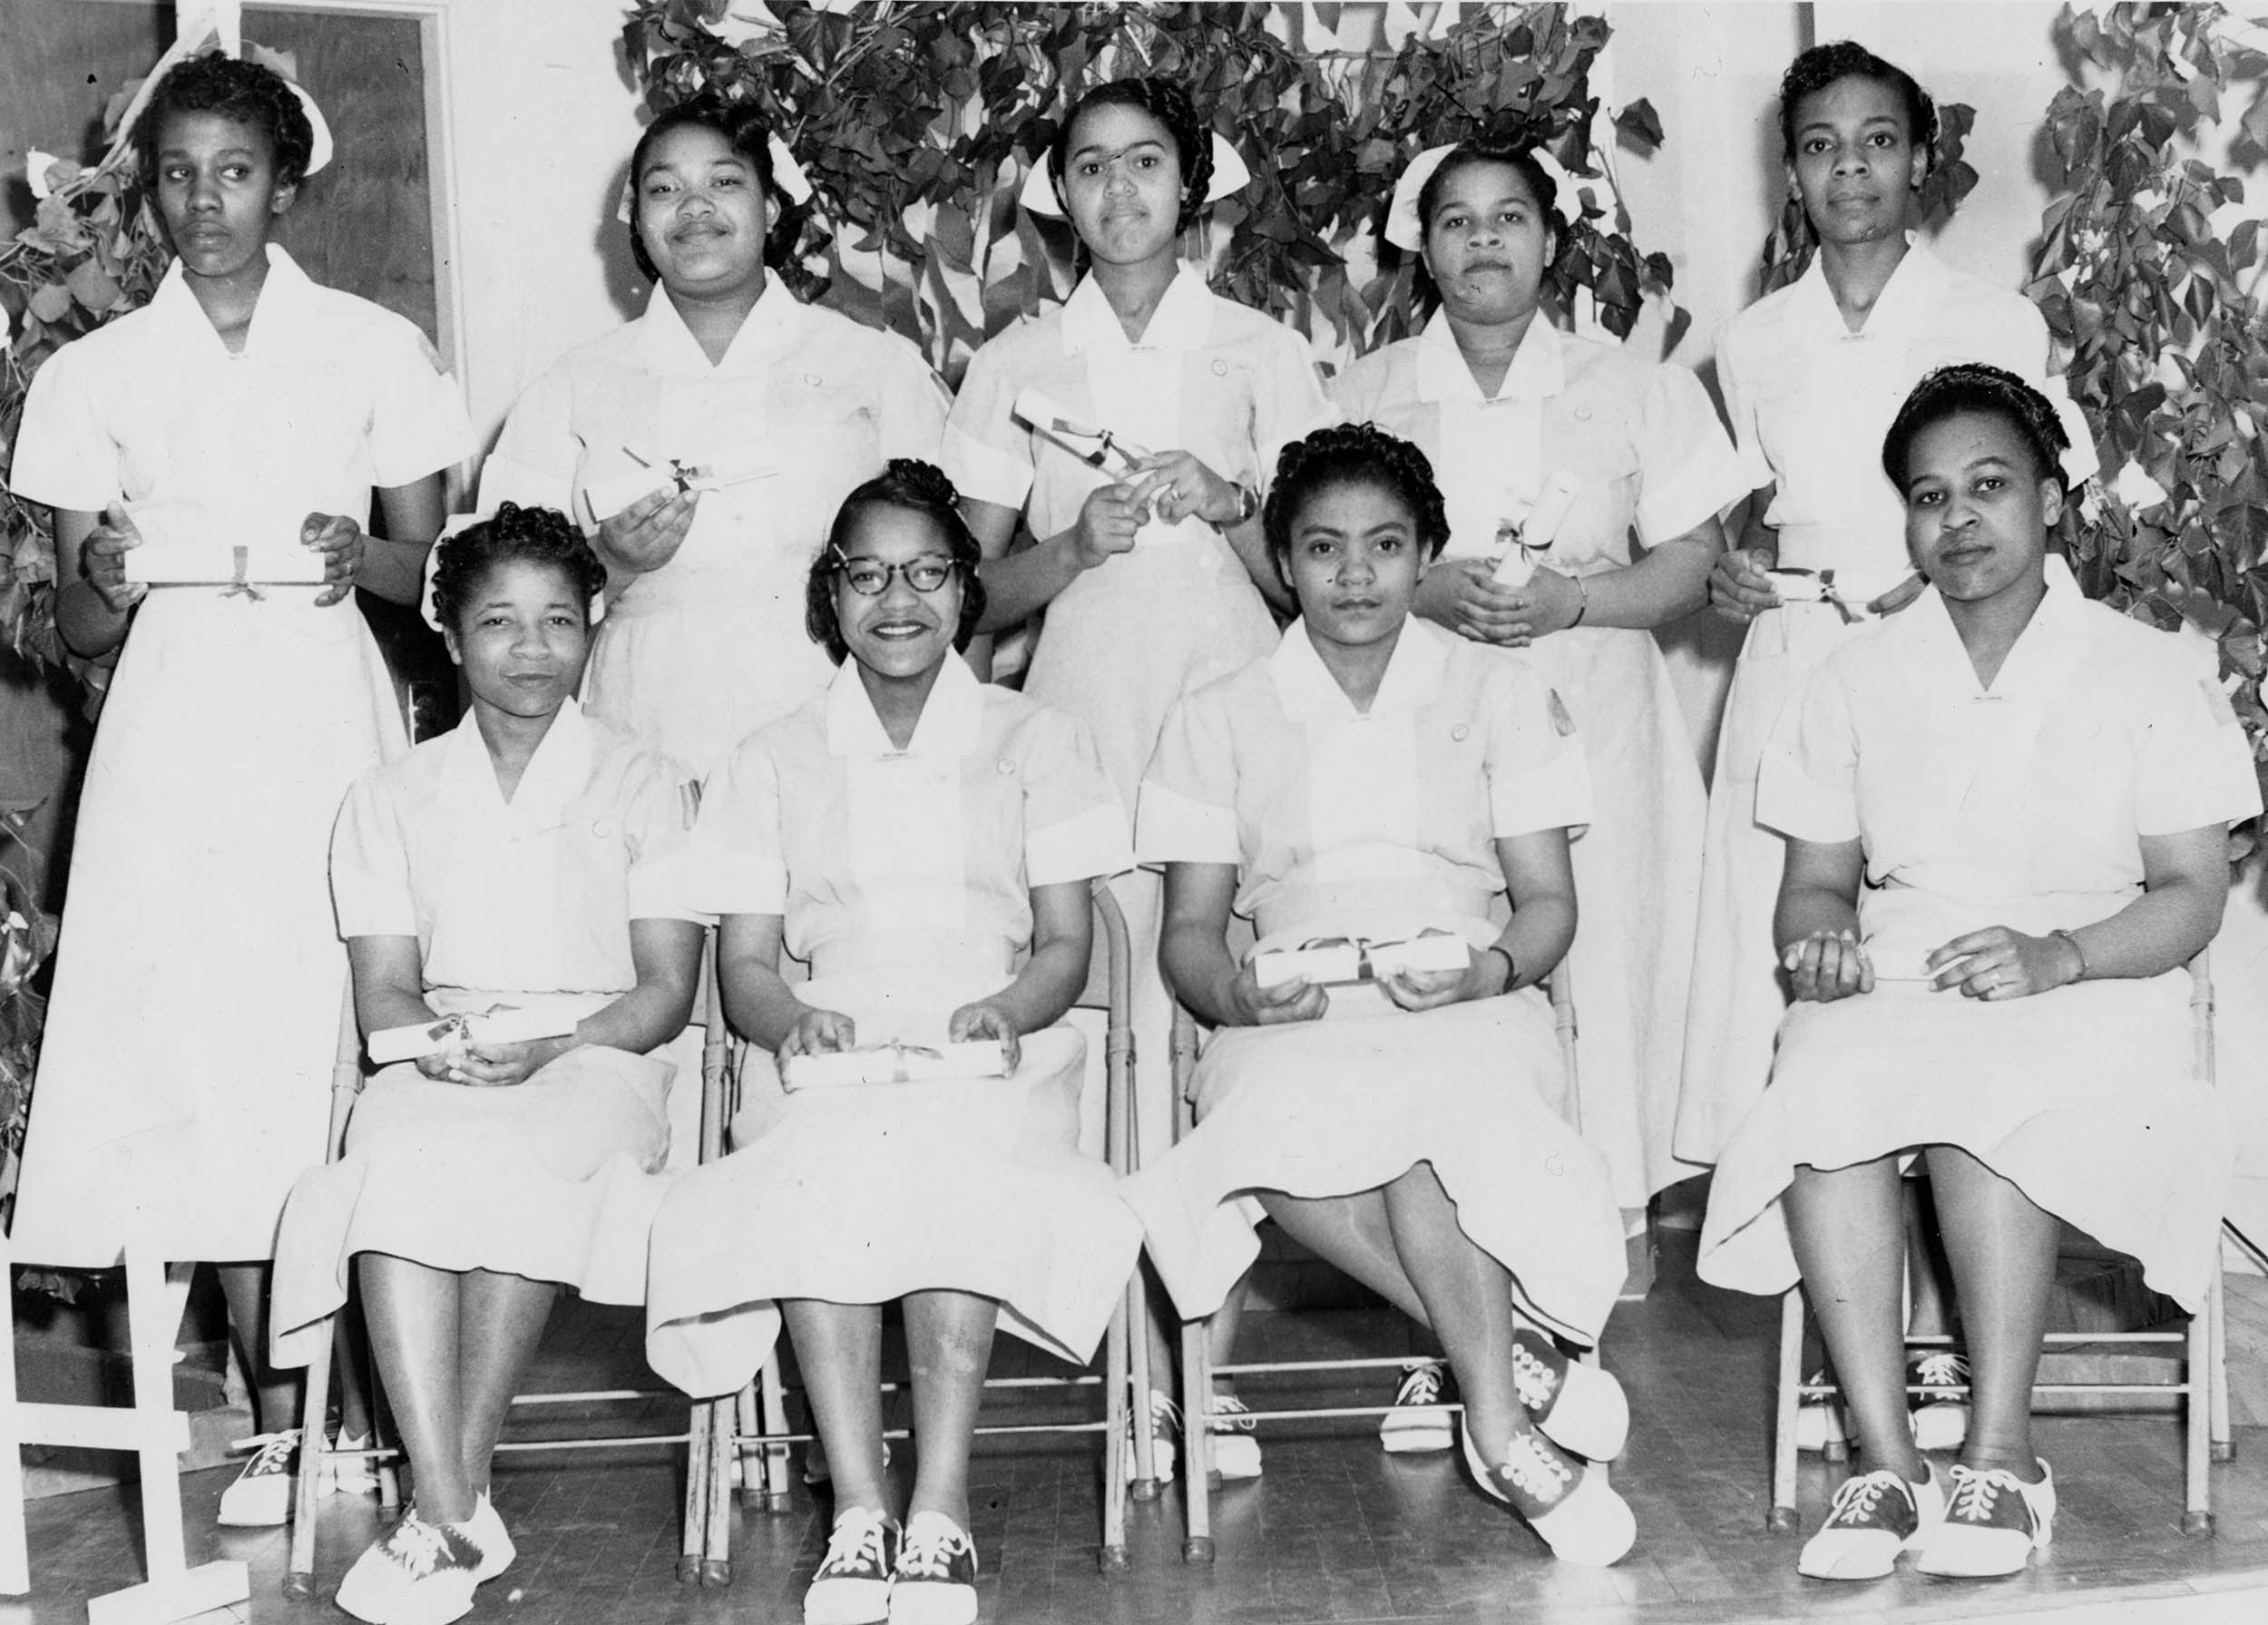 Group photo of 9 African American Nurses with their diplomas